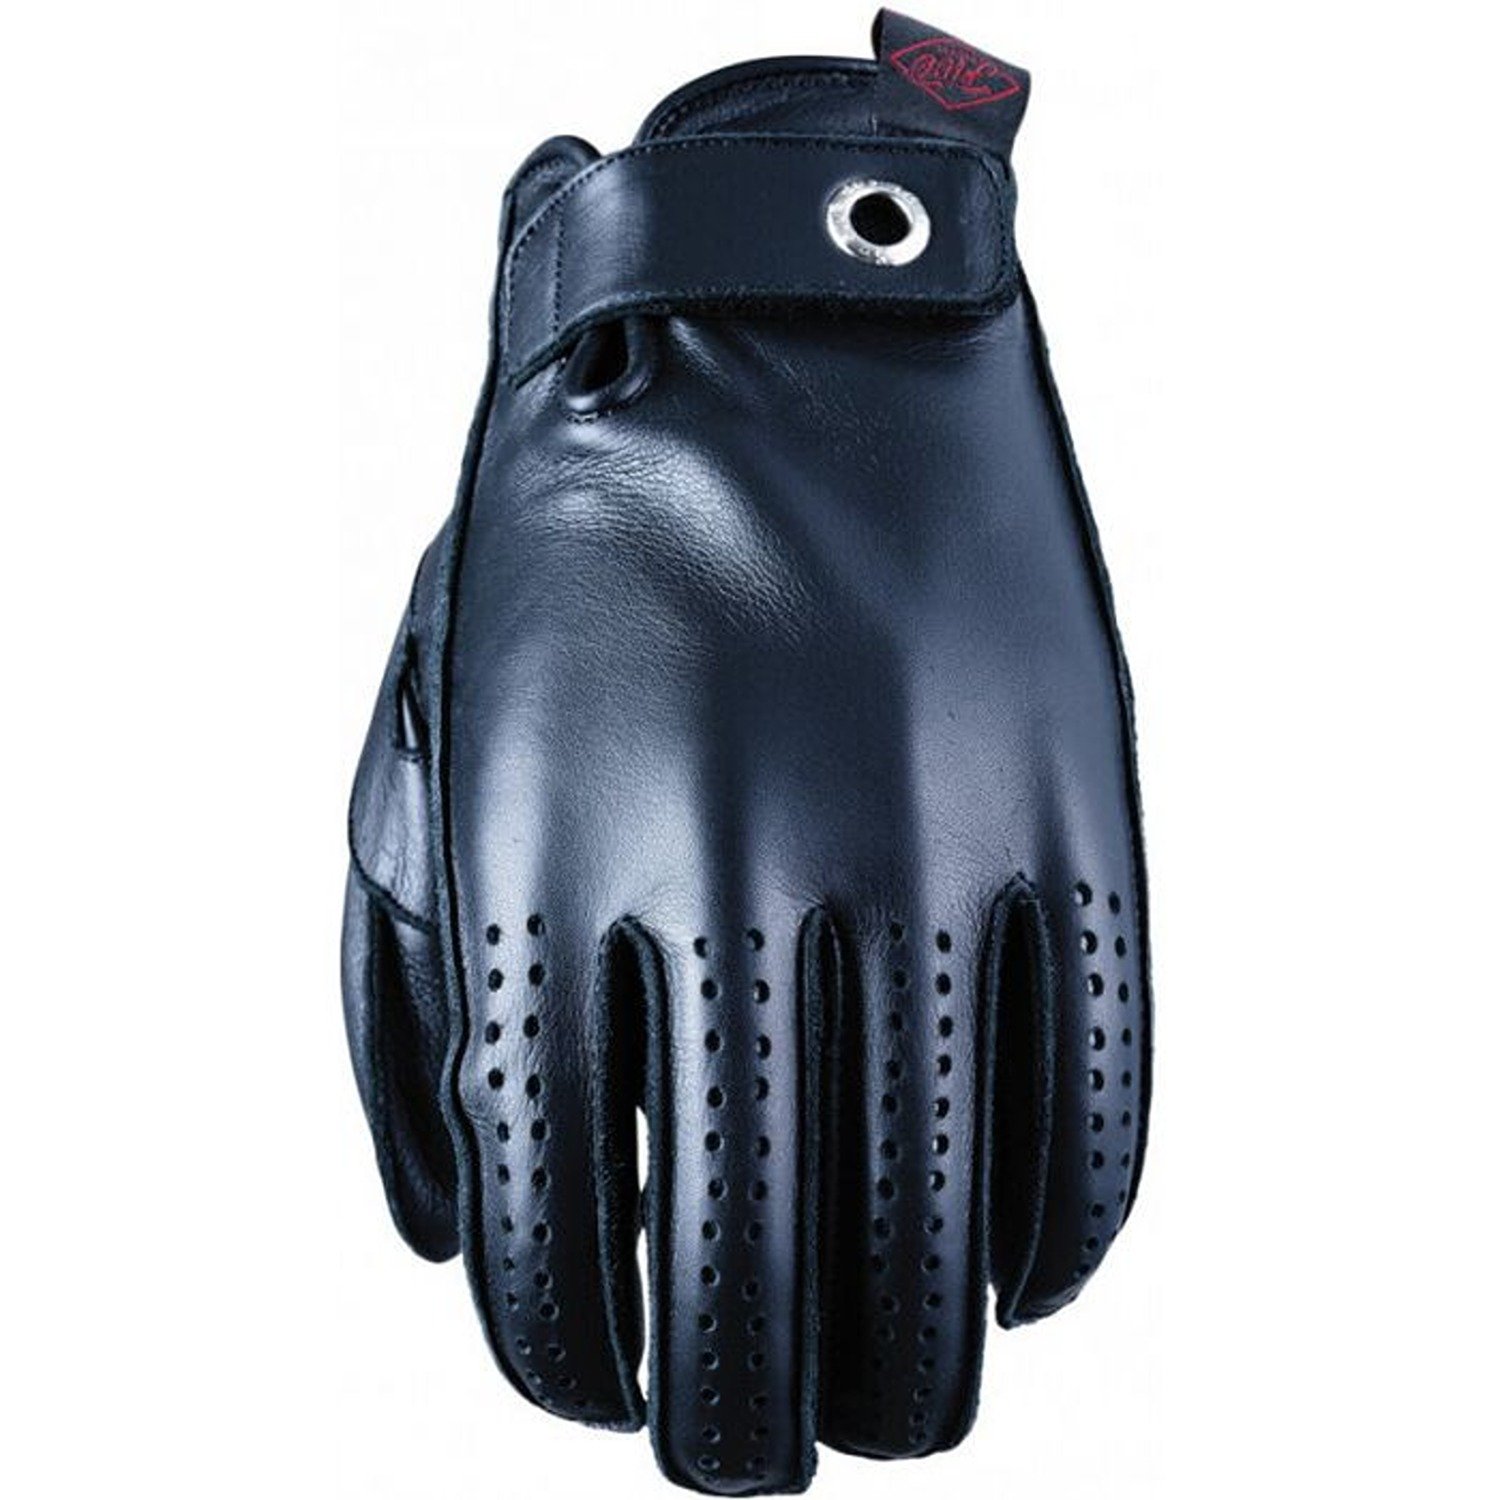 Image of Five Colorado Gloves Black Size 3XL ID 4770916487320